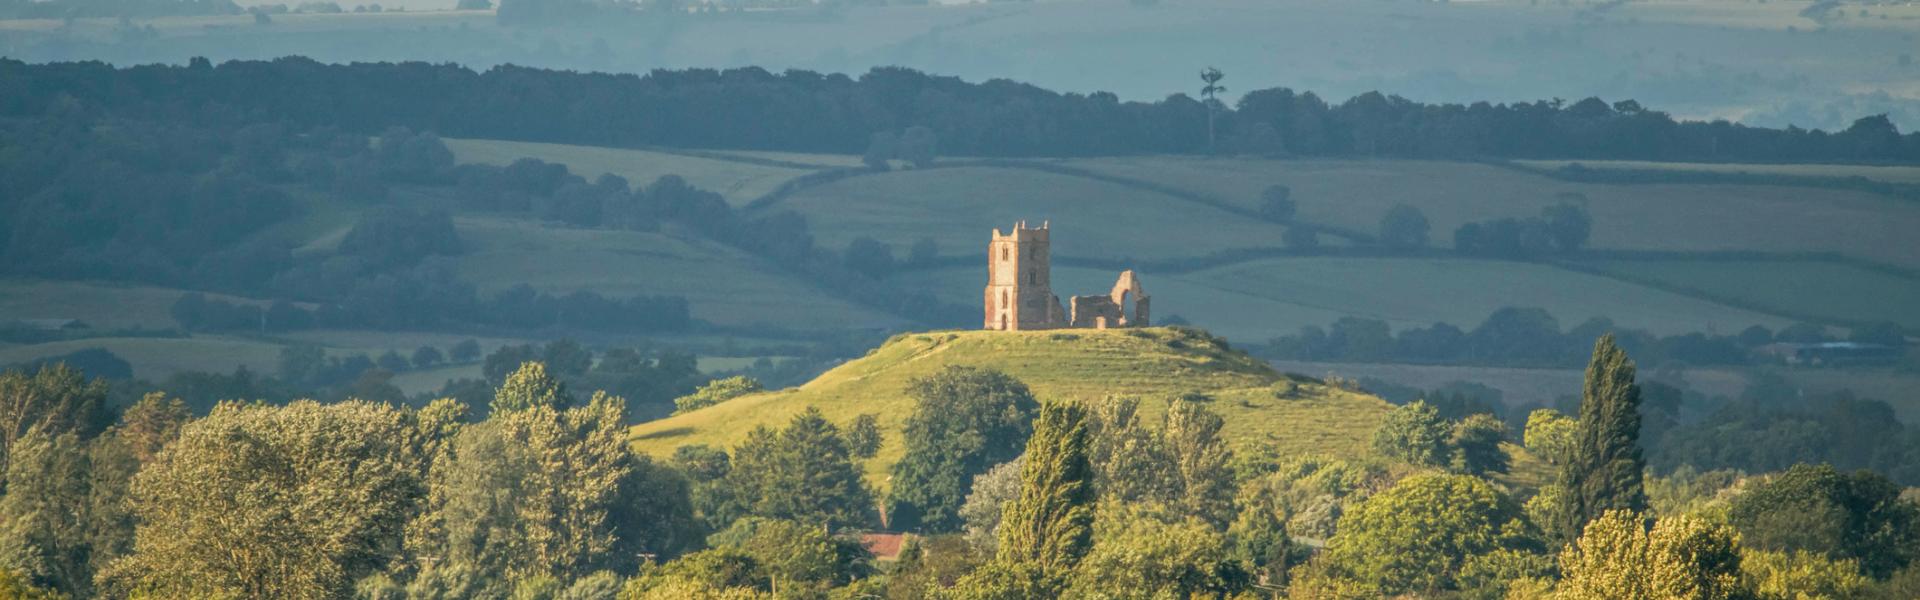 Holiday lettings & accommodation in Somerset - Wimdu